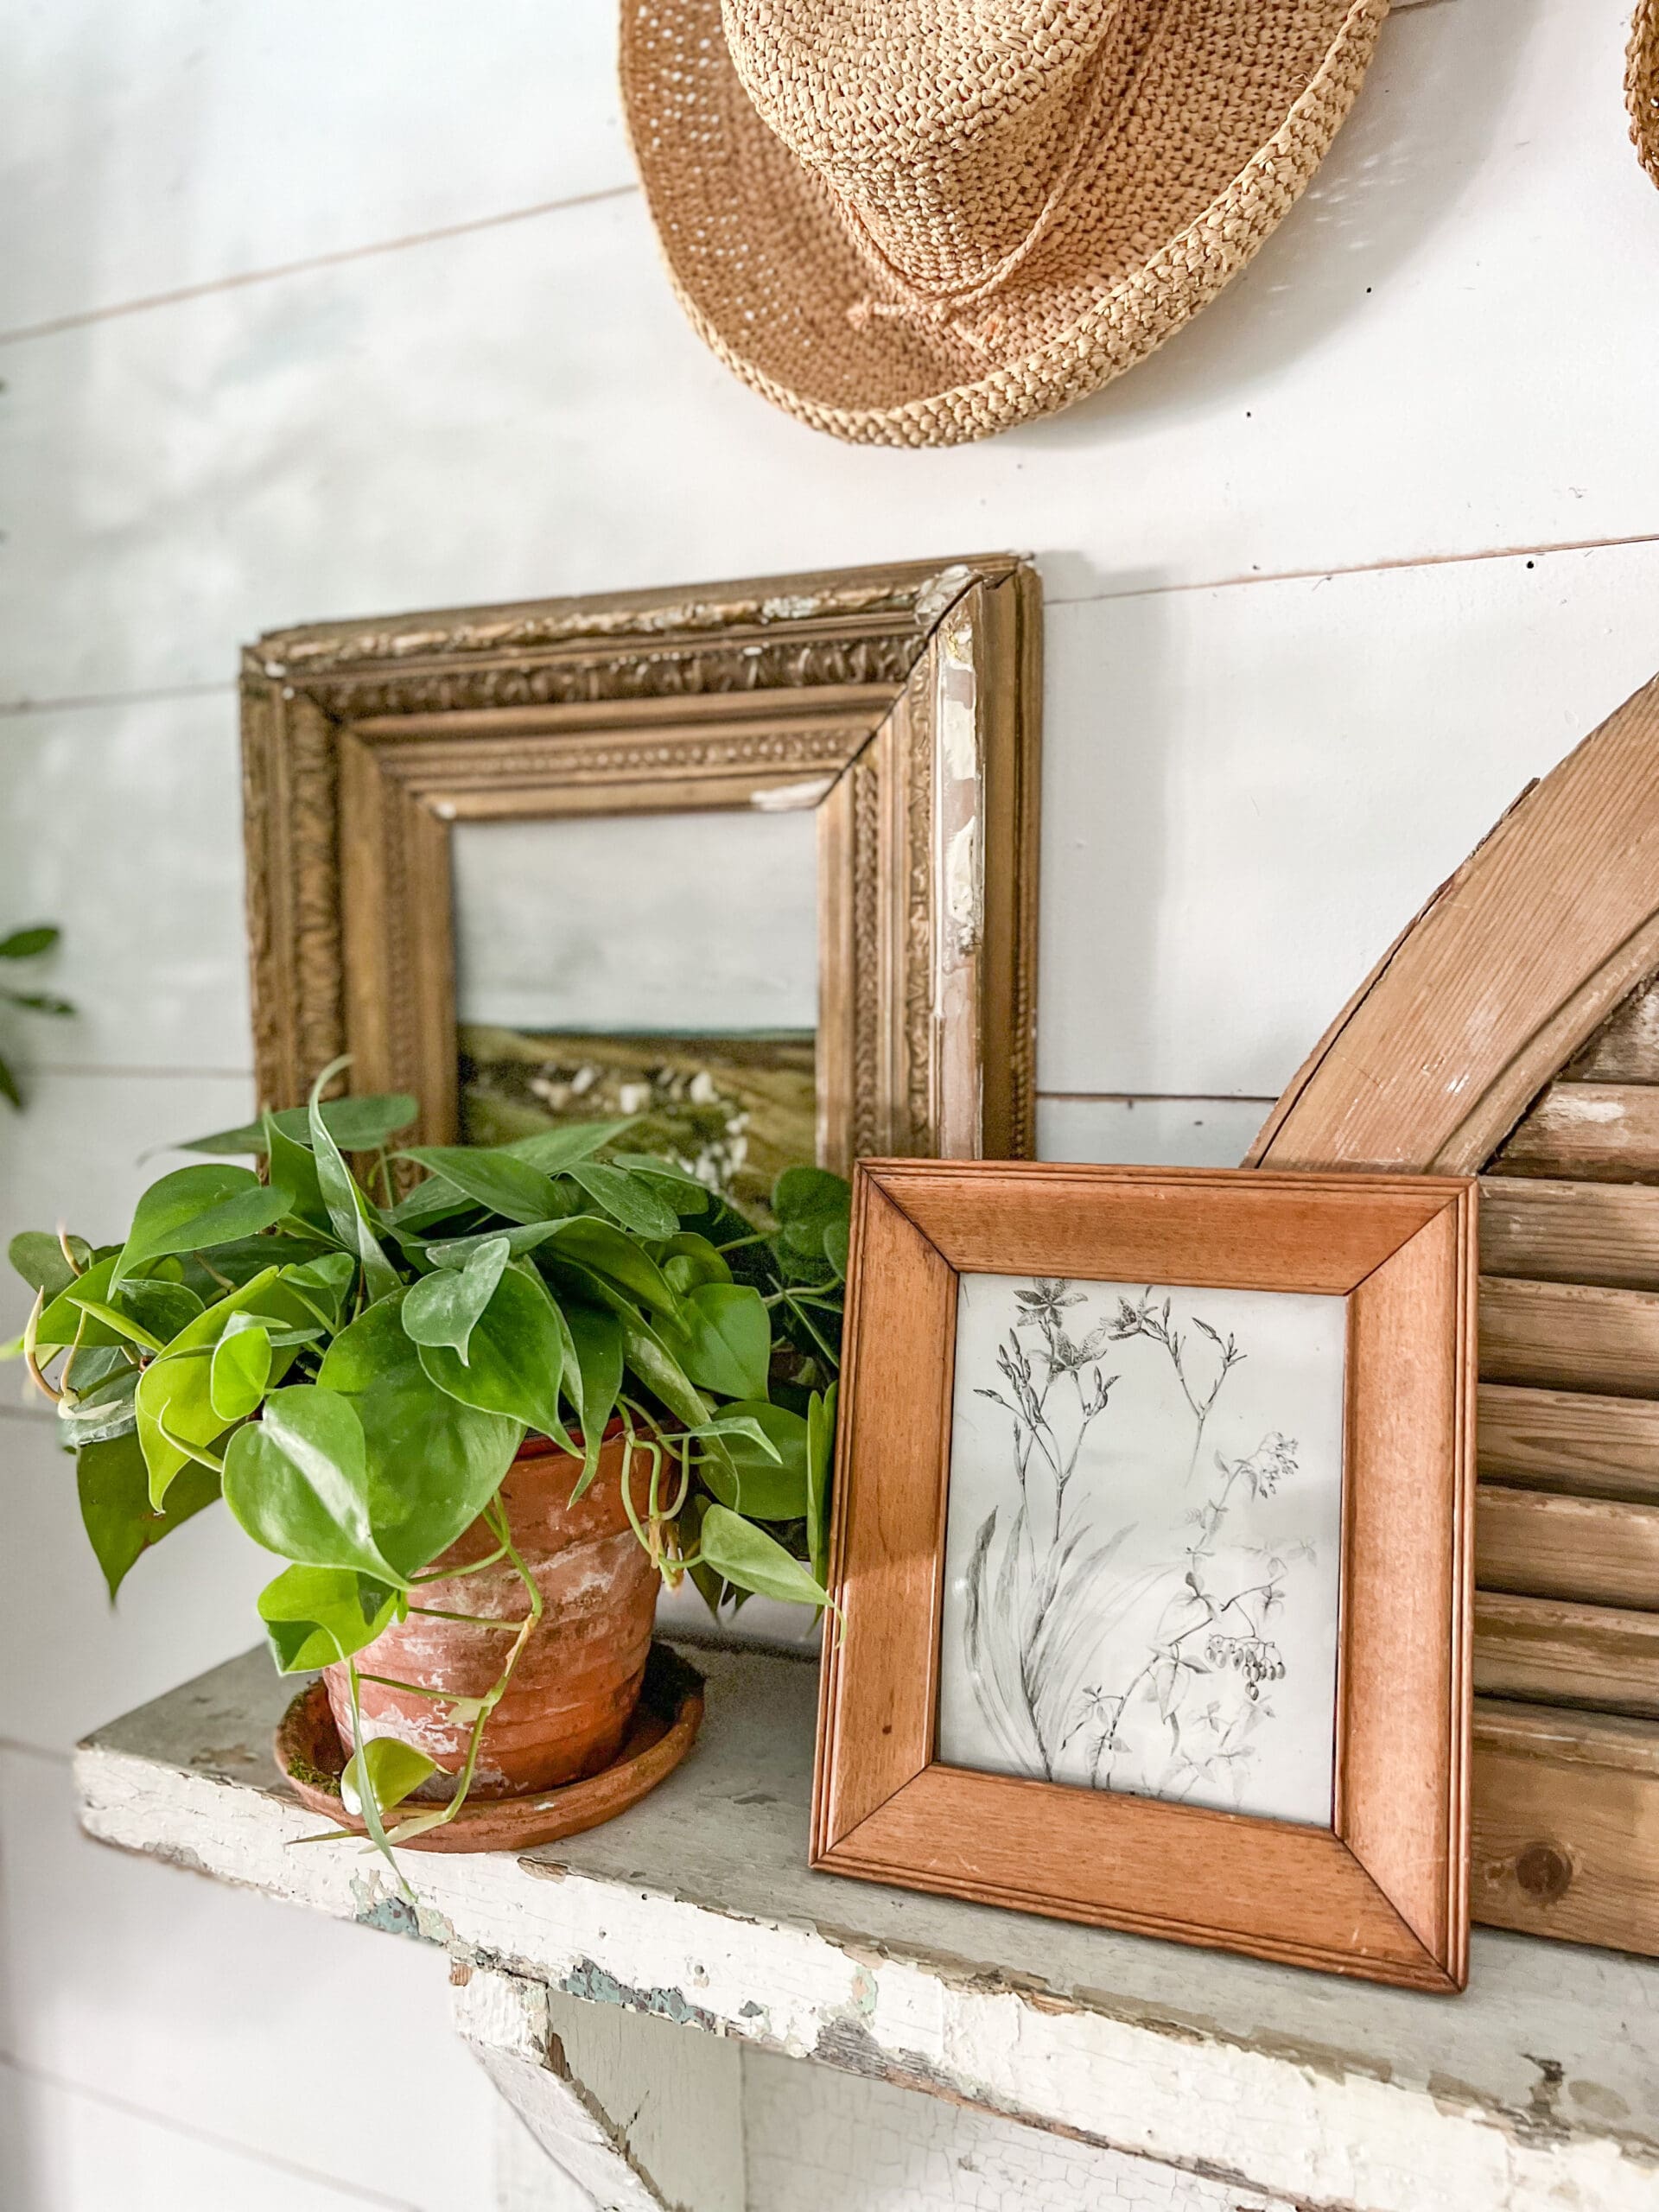 small art in a frame next to a terracotta pot holding a plant